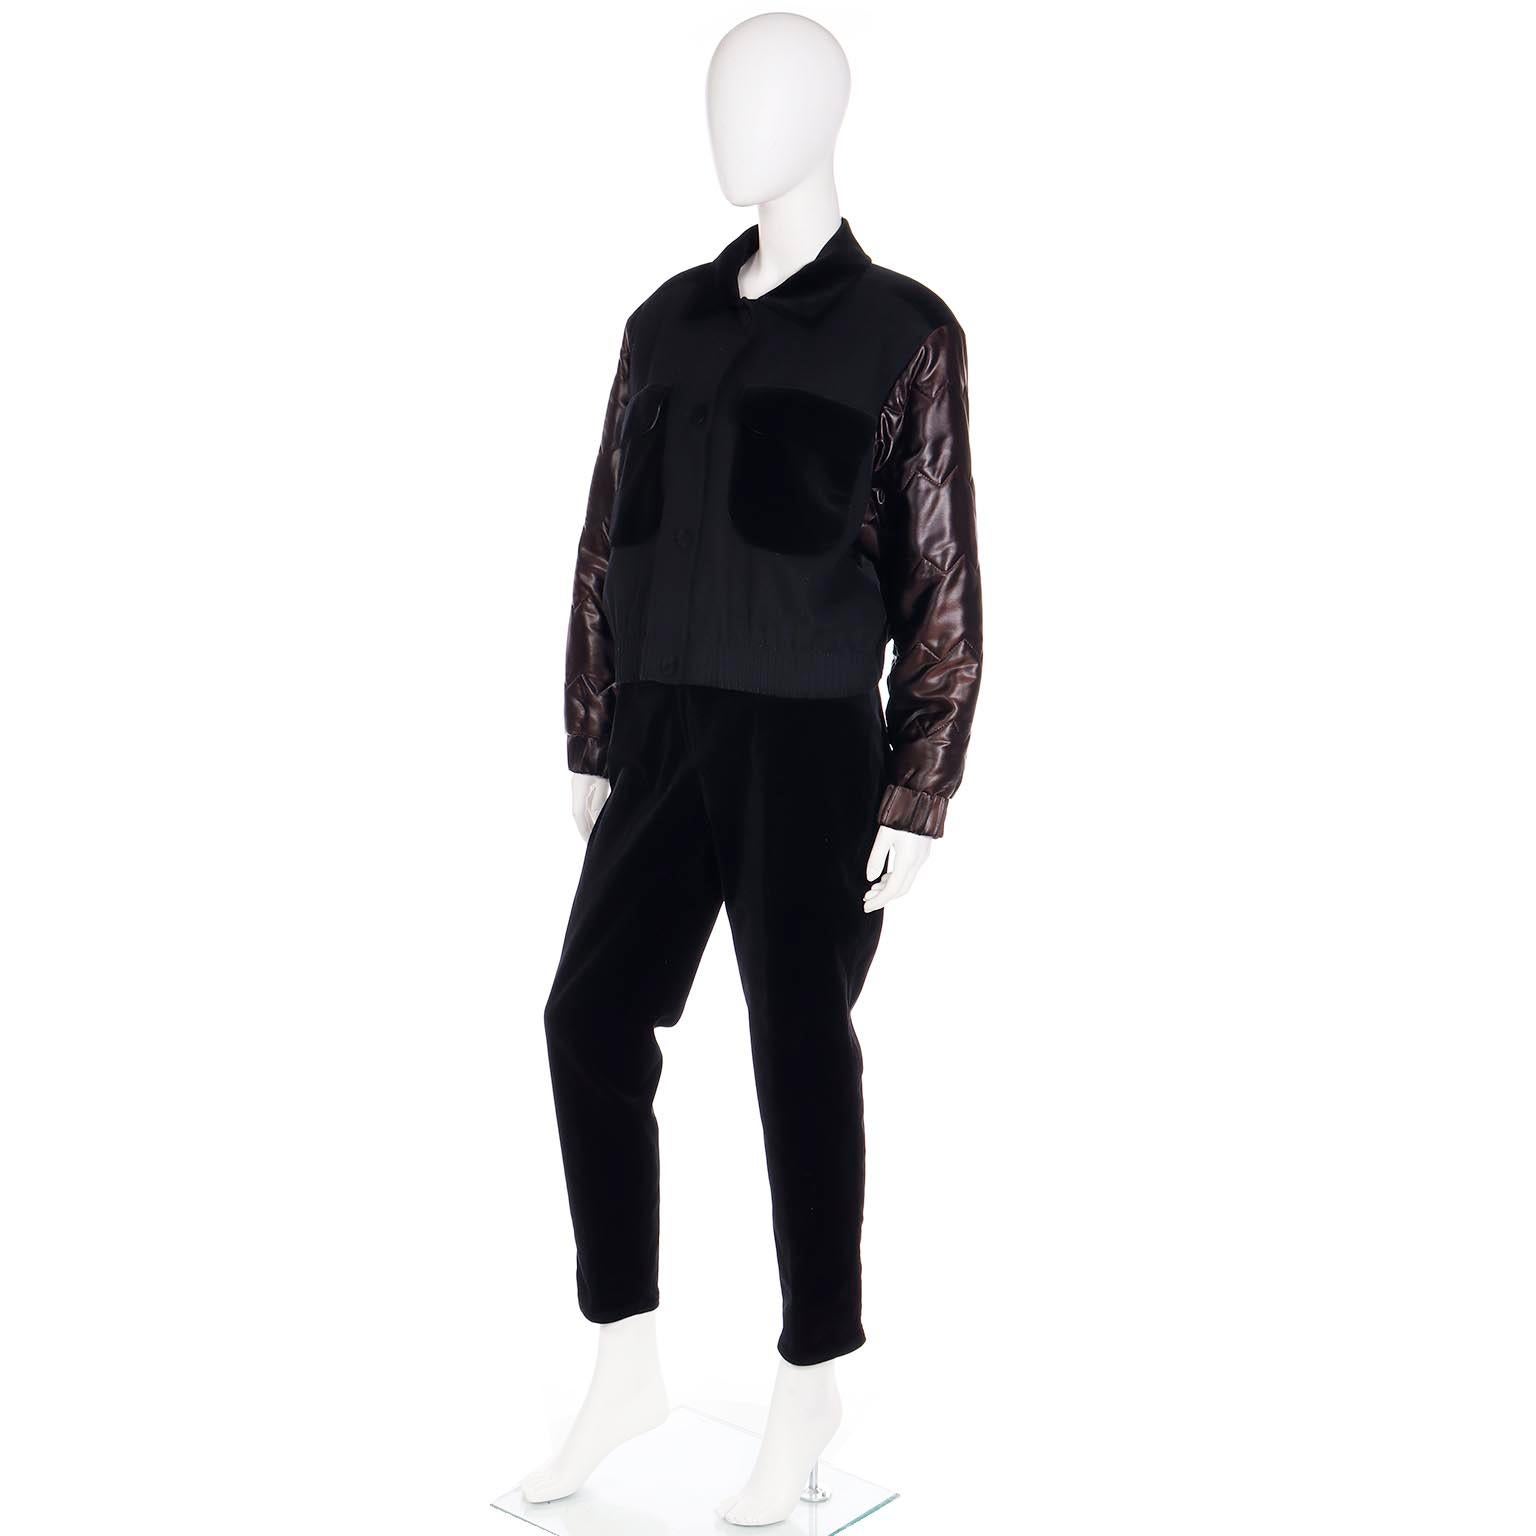 Vintage Louis Feraud Black Bomber Jacket w Quilted Satin Sleeves & Pants Outfit For Sale 3